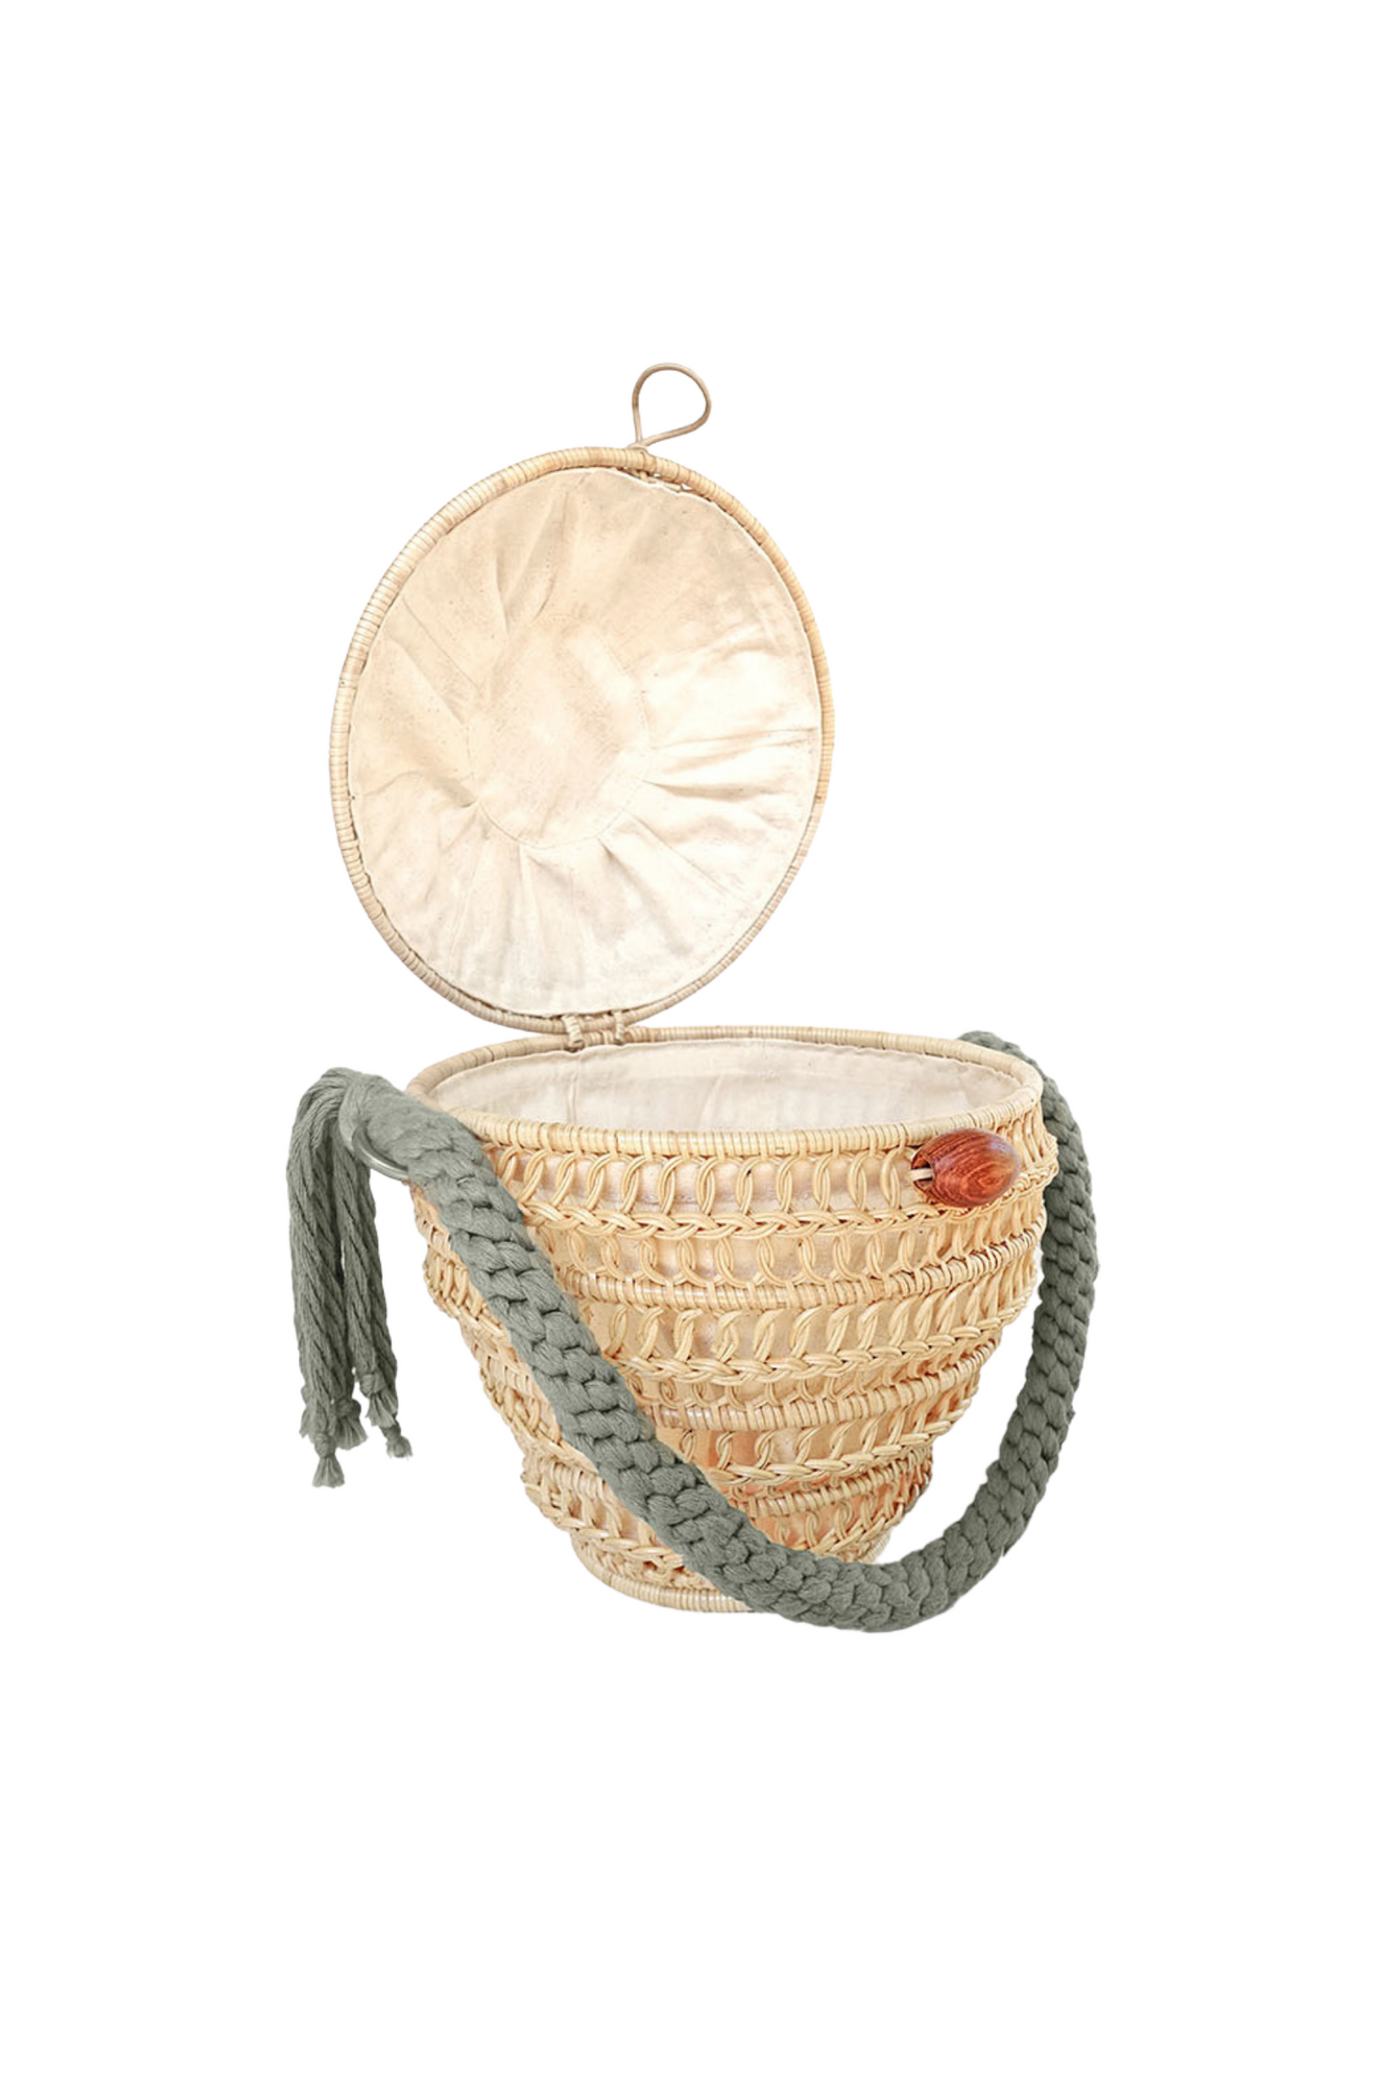 Manava Mony Rattan Bag, available on ZERRIN with free Singapore shipping